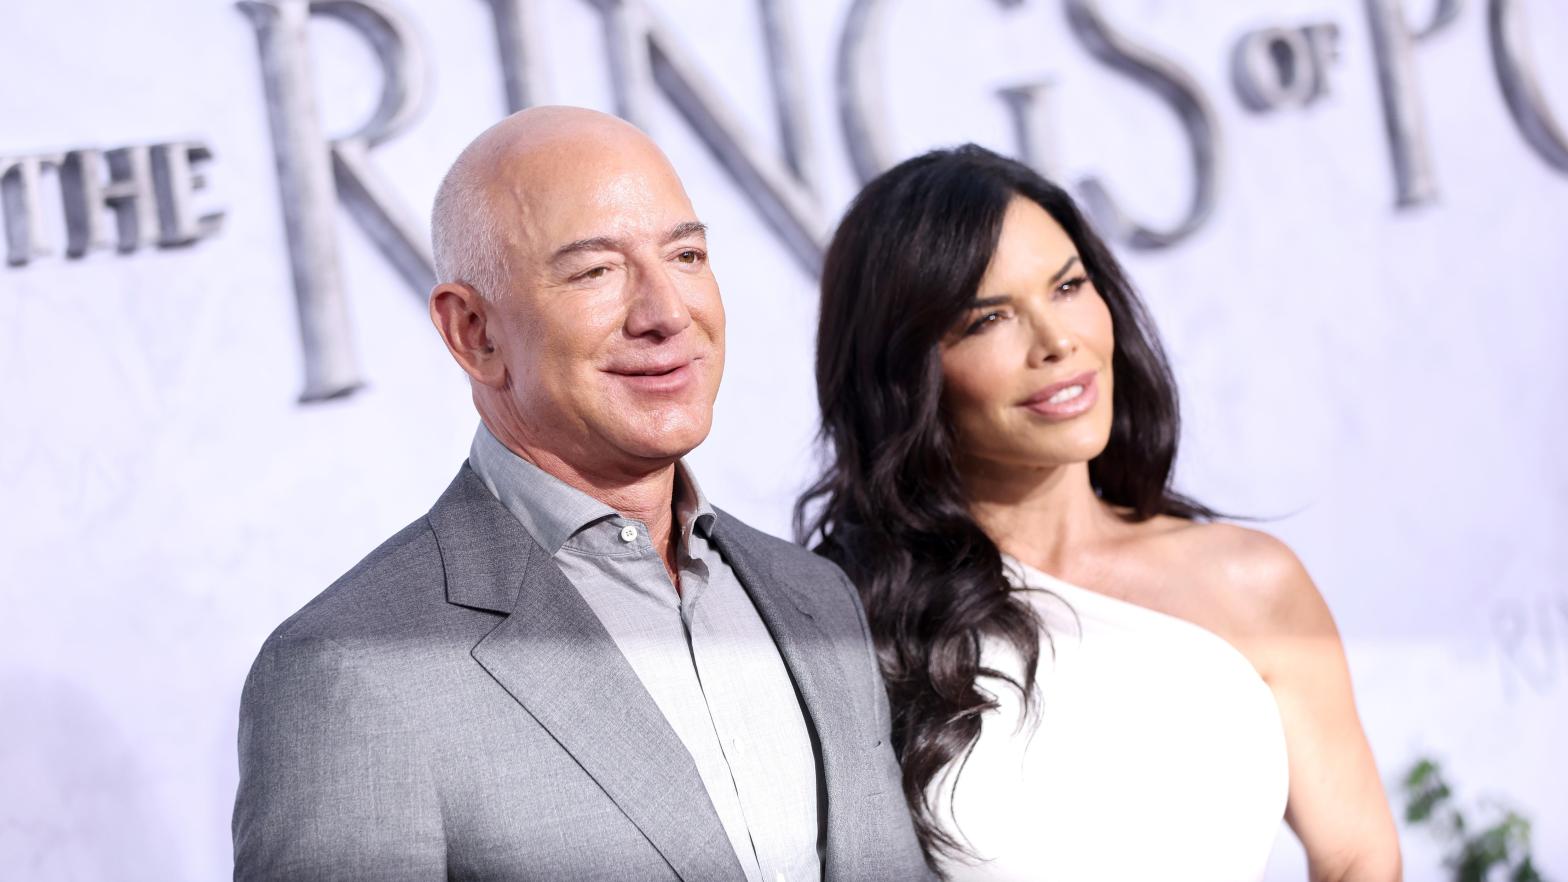 Jeff Bezos can eat a McDonald's hamburger with nostalgia, though the rest of us have a hard time stomaching him. (Photo: Matt Winkelmeyer, Getty Images)